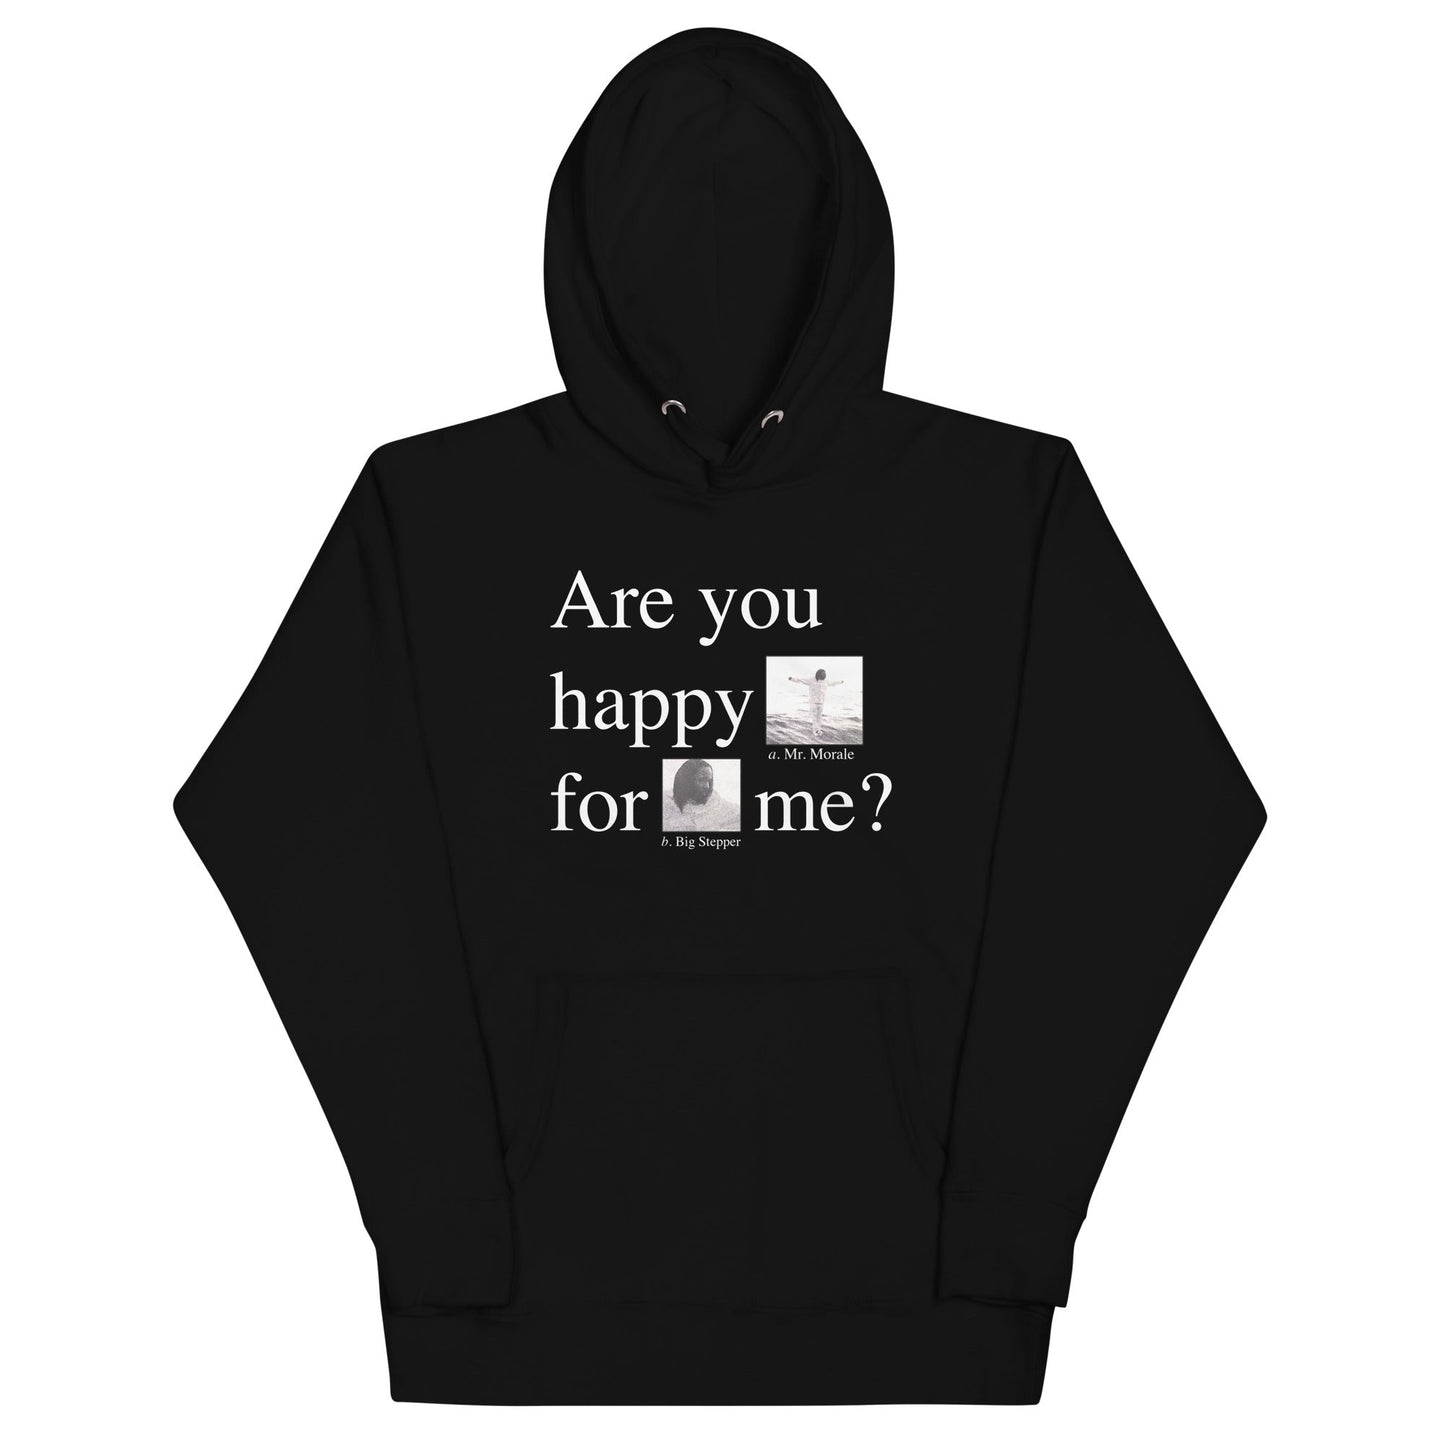 Are you happy for me? - Madonna Celebration Tour Merch Cotton Tee Hoodie Red